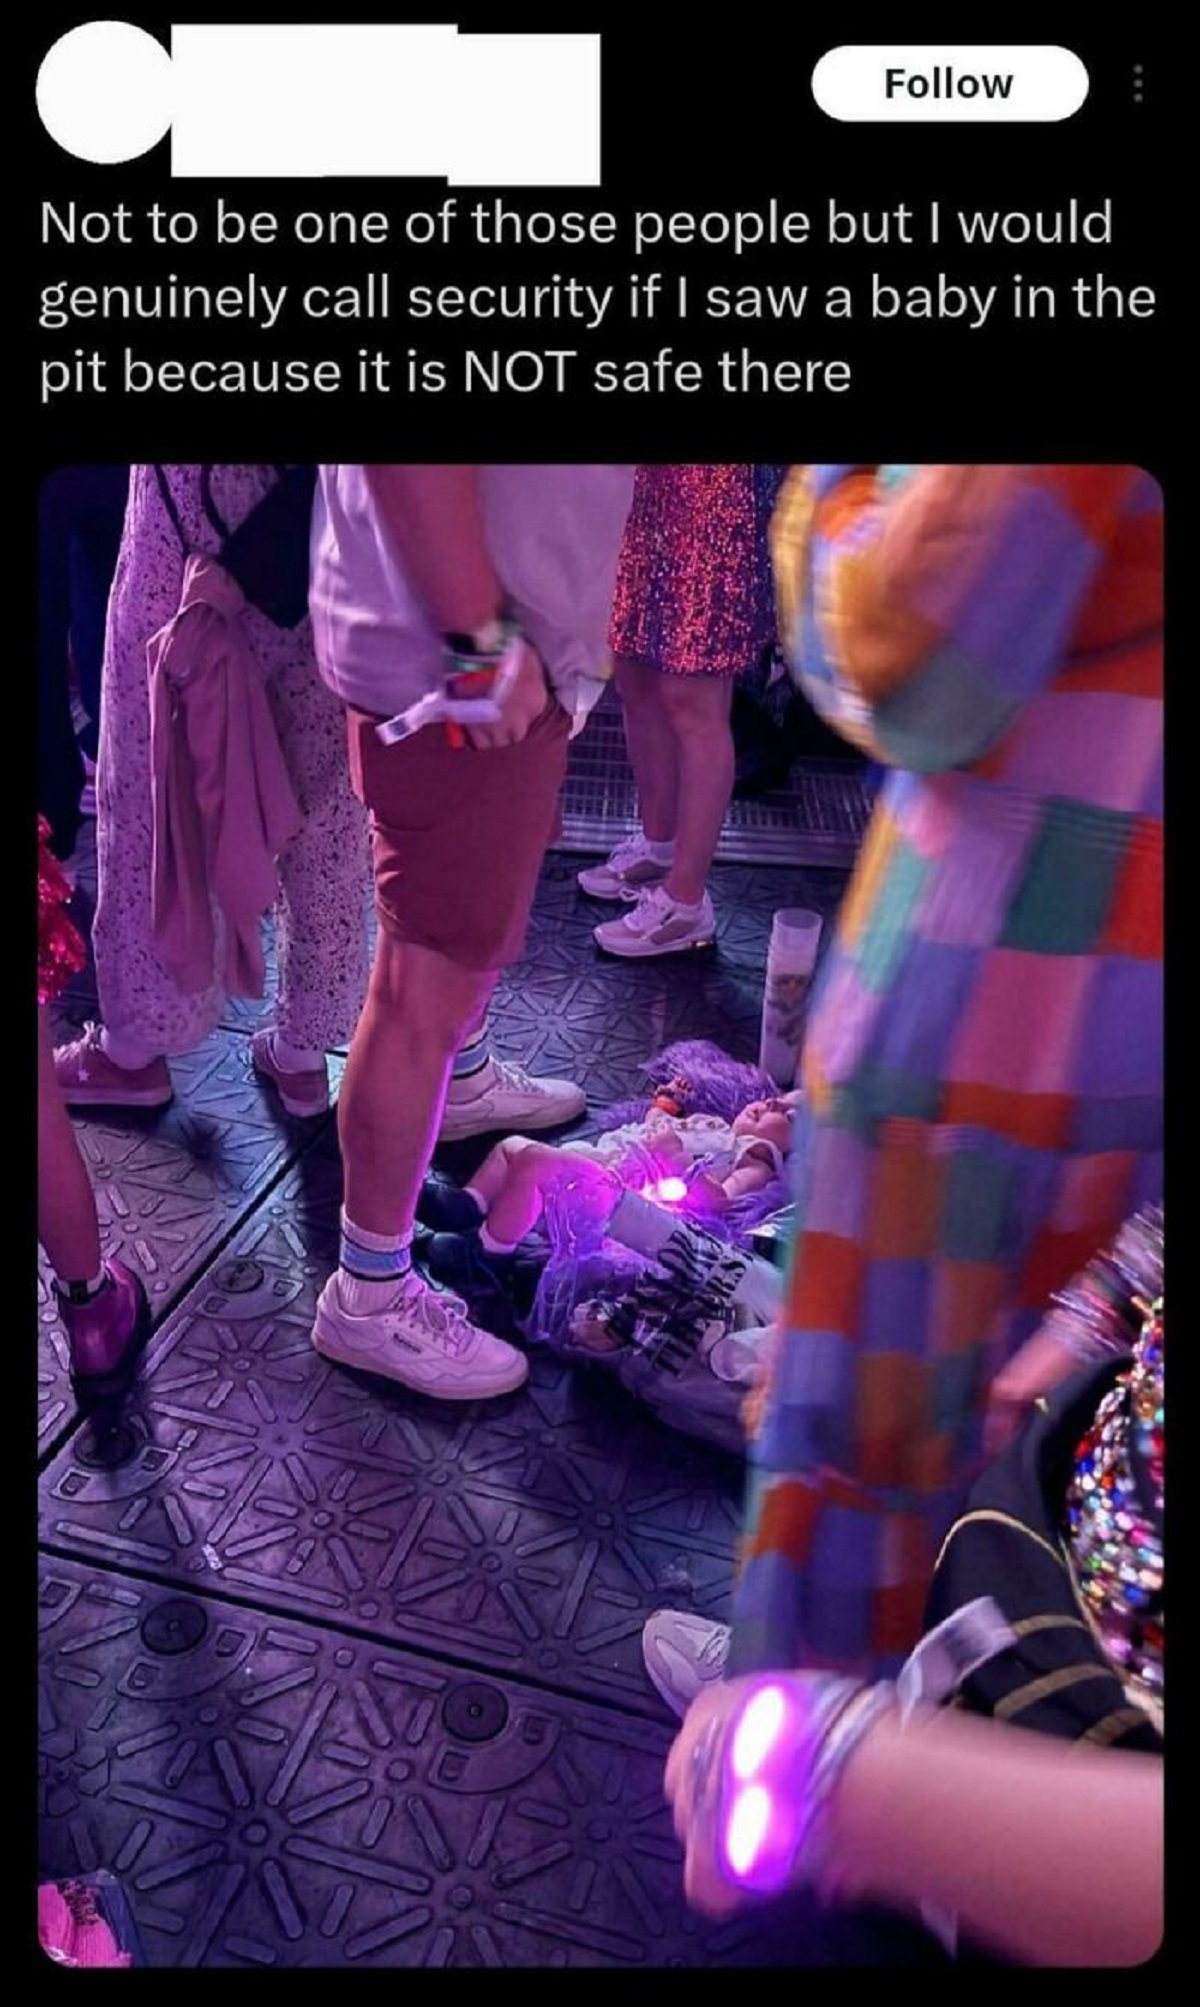 baby at taylor swift concert - C Not to be one of those people but I would genuinely call security if I saw a baby in the pit because it is Not safe there